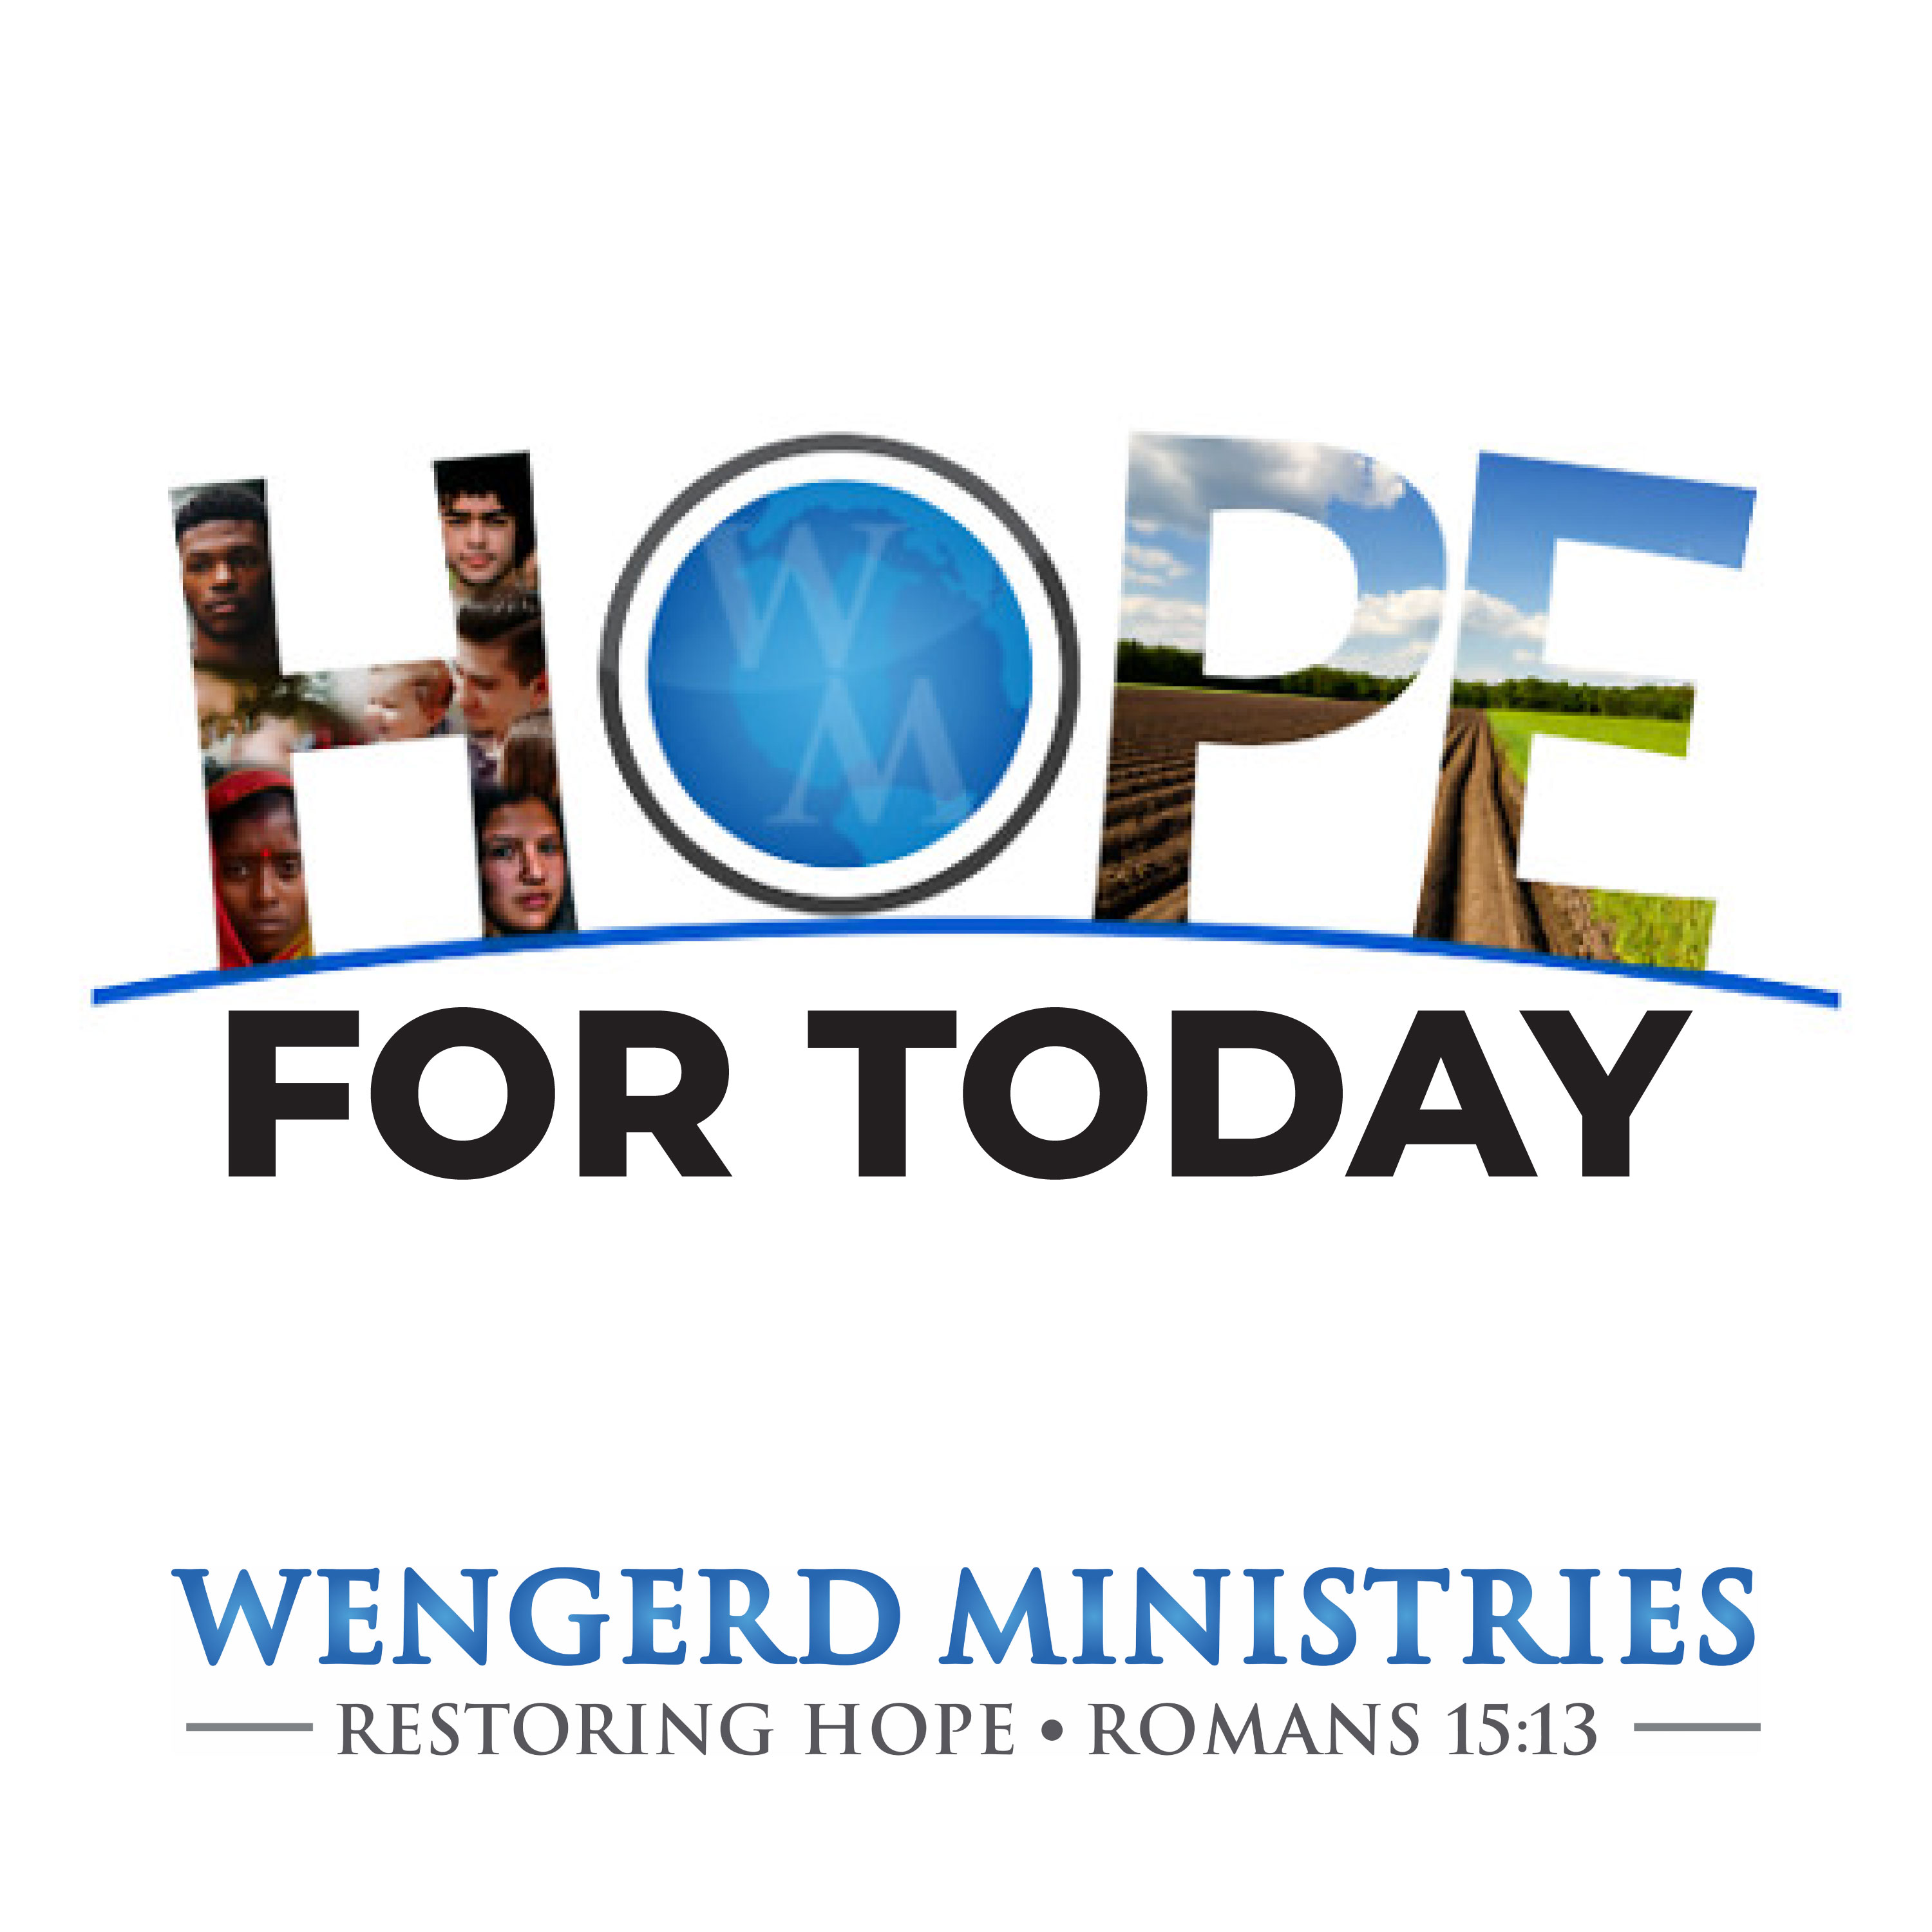 Artwork for Hope for Today by Wengerd Ministries